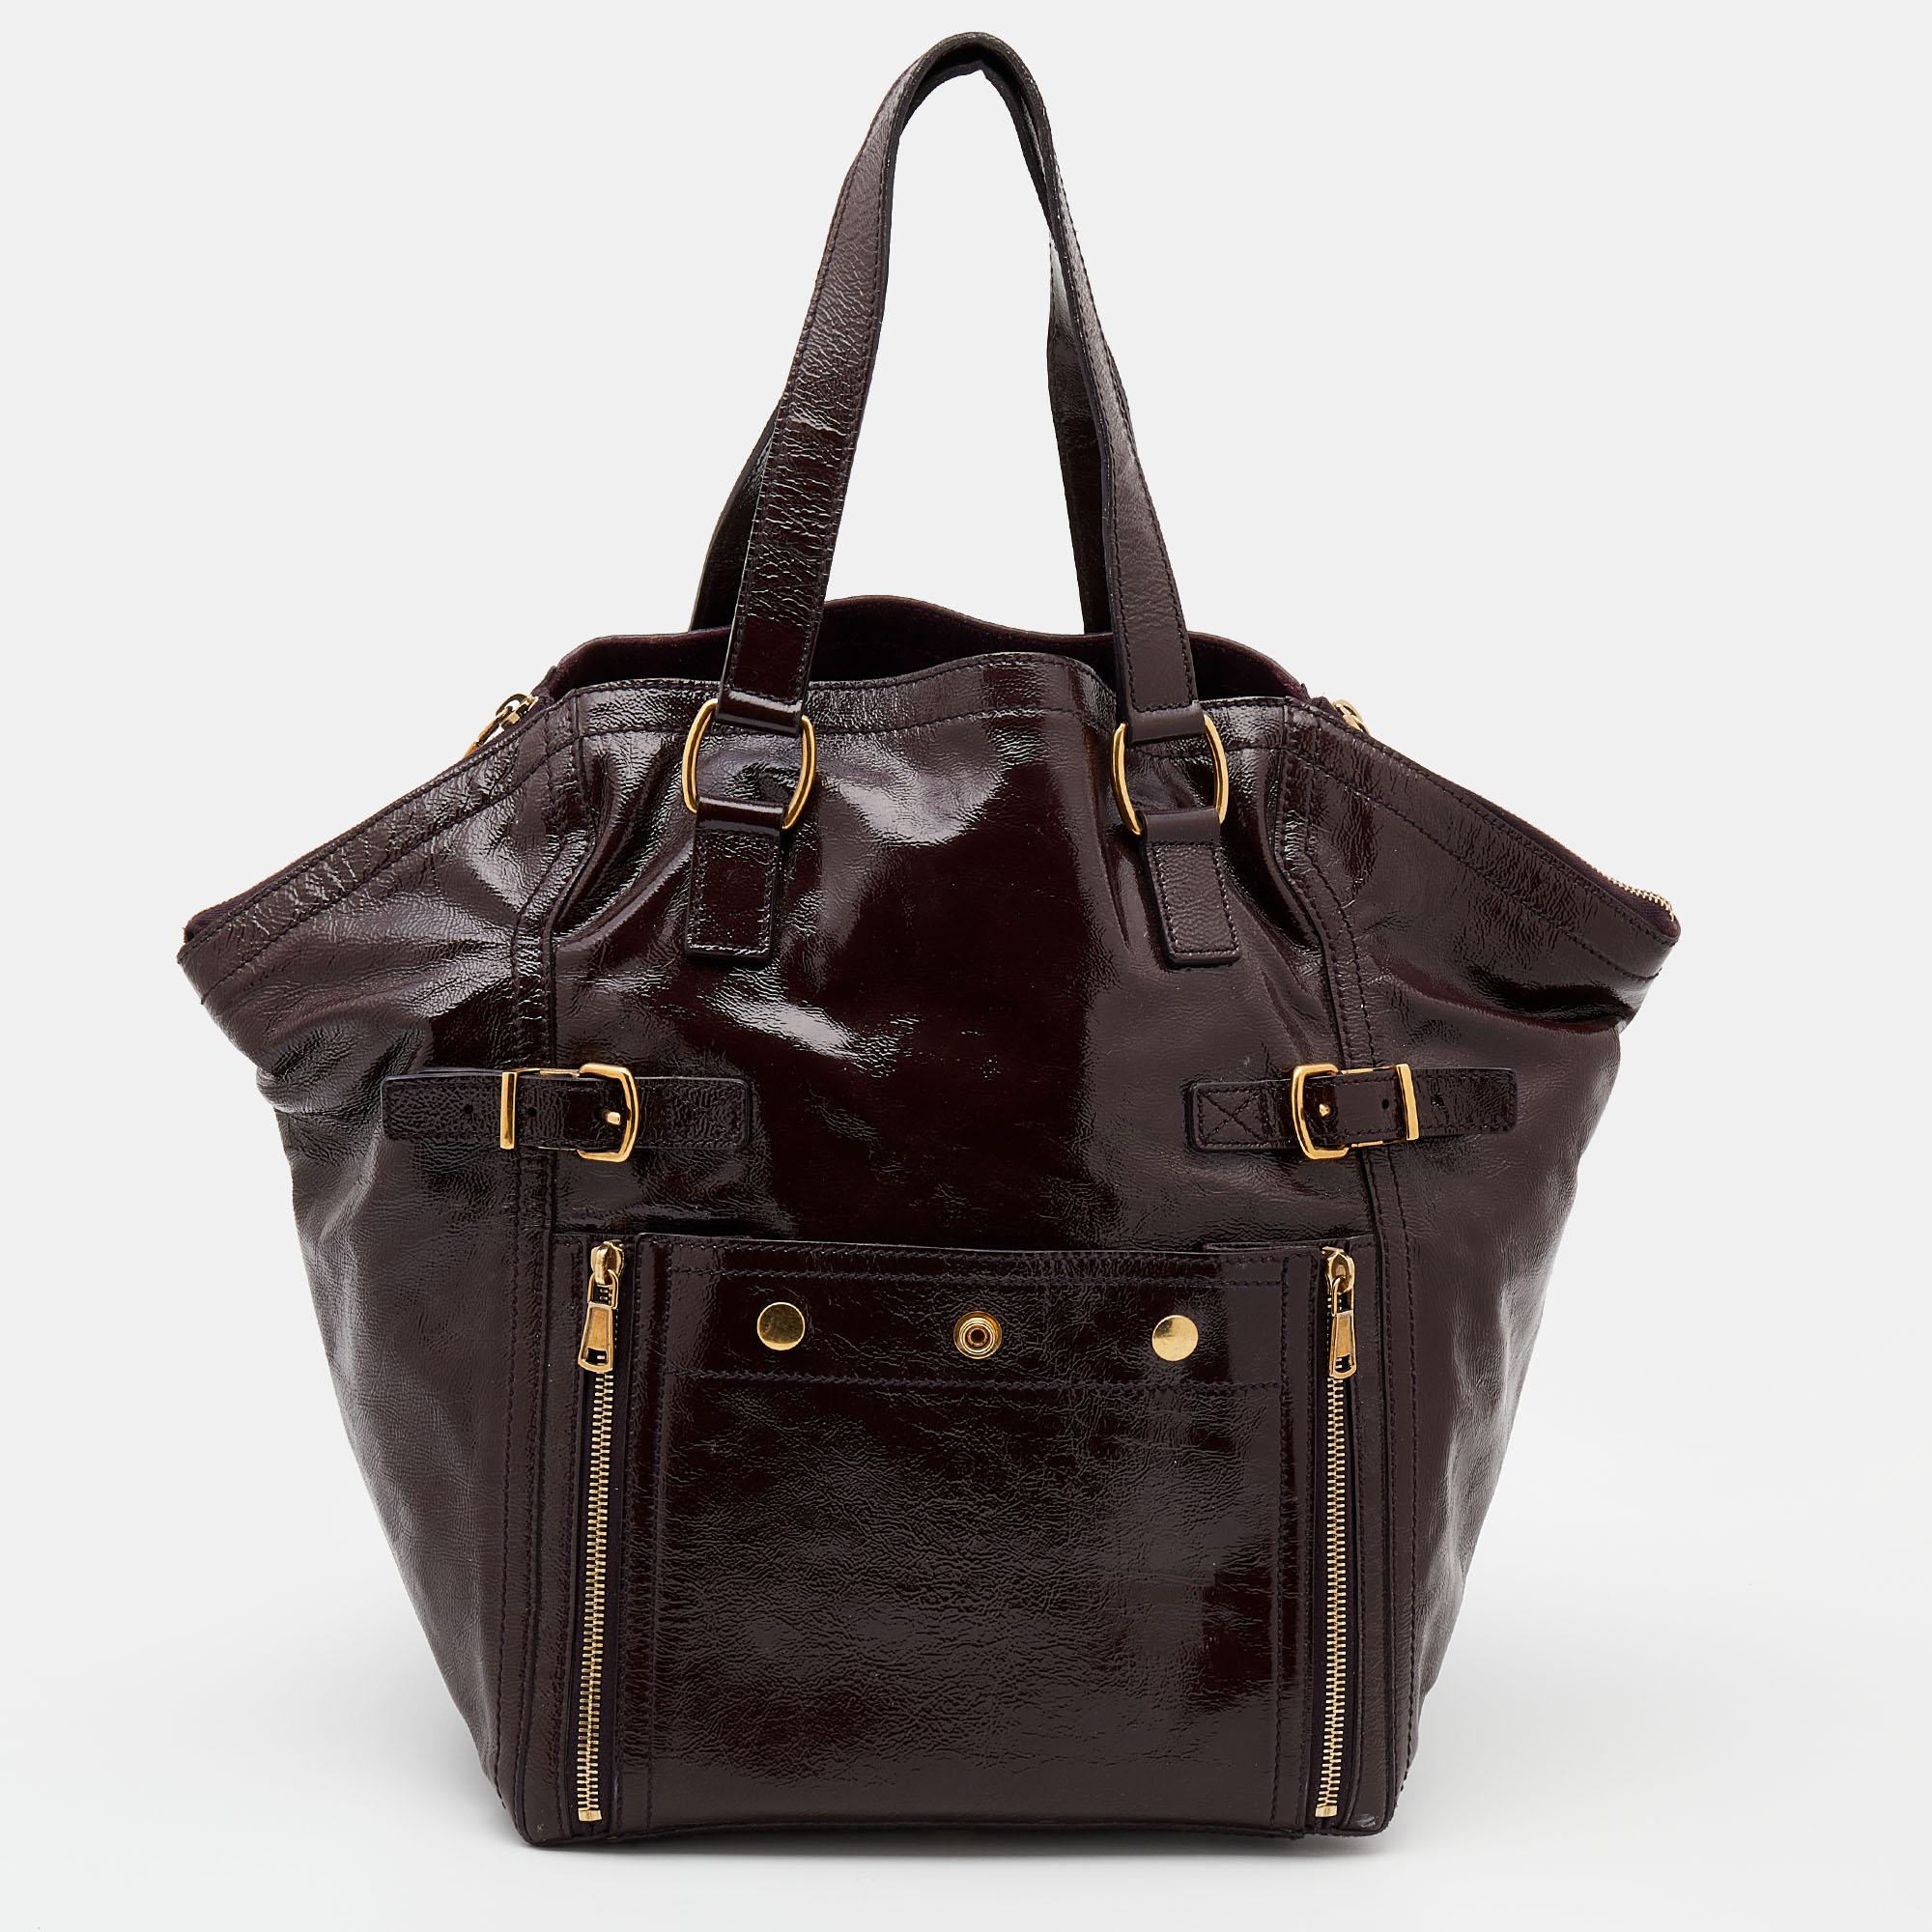 Every woman needs a bag that is pretty and functional, just like this Downtown tote from Yves Saint Laurent. Crafted with precision using patent leather, the bag has been styled with zippers and buckles. It also features two handles, and a top which